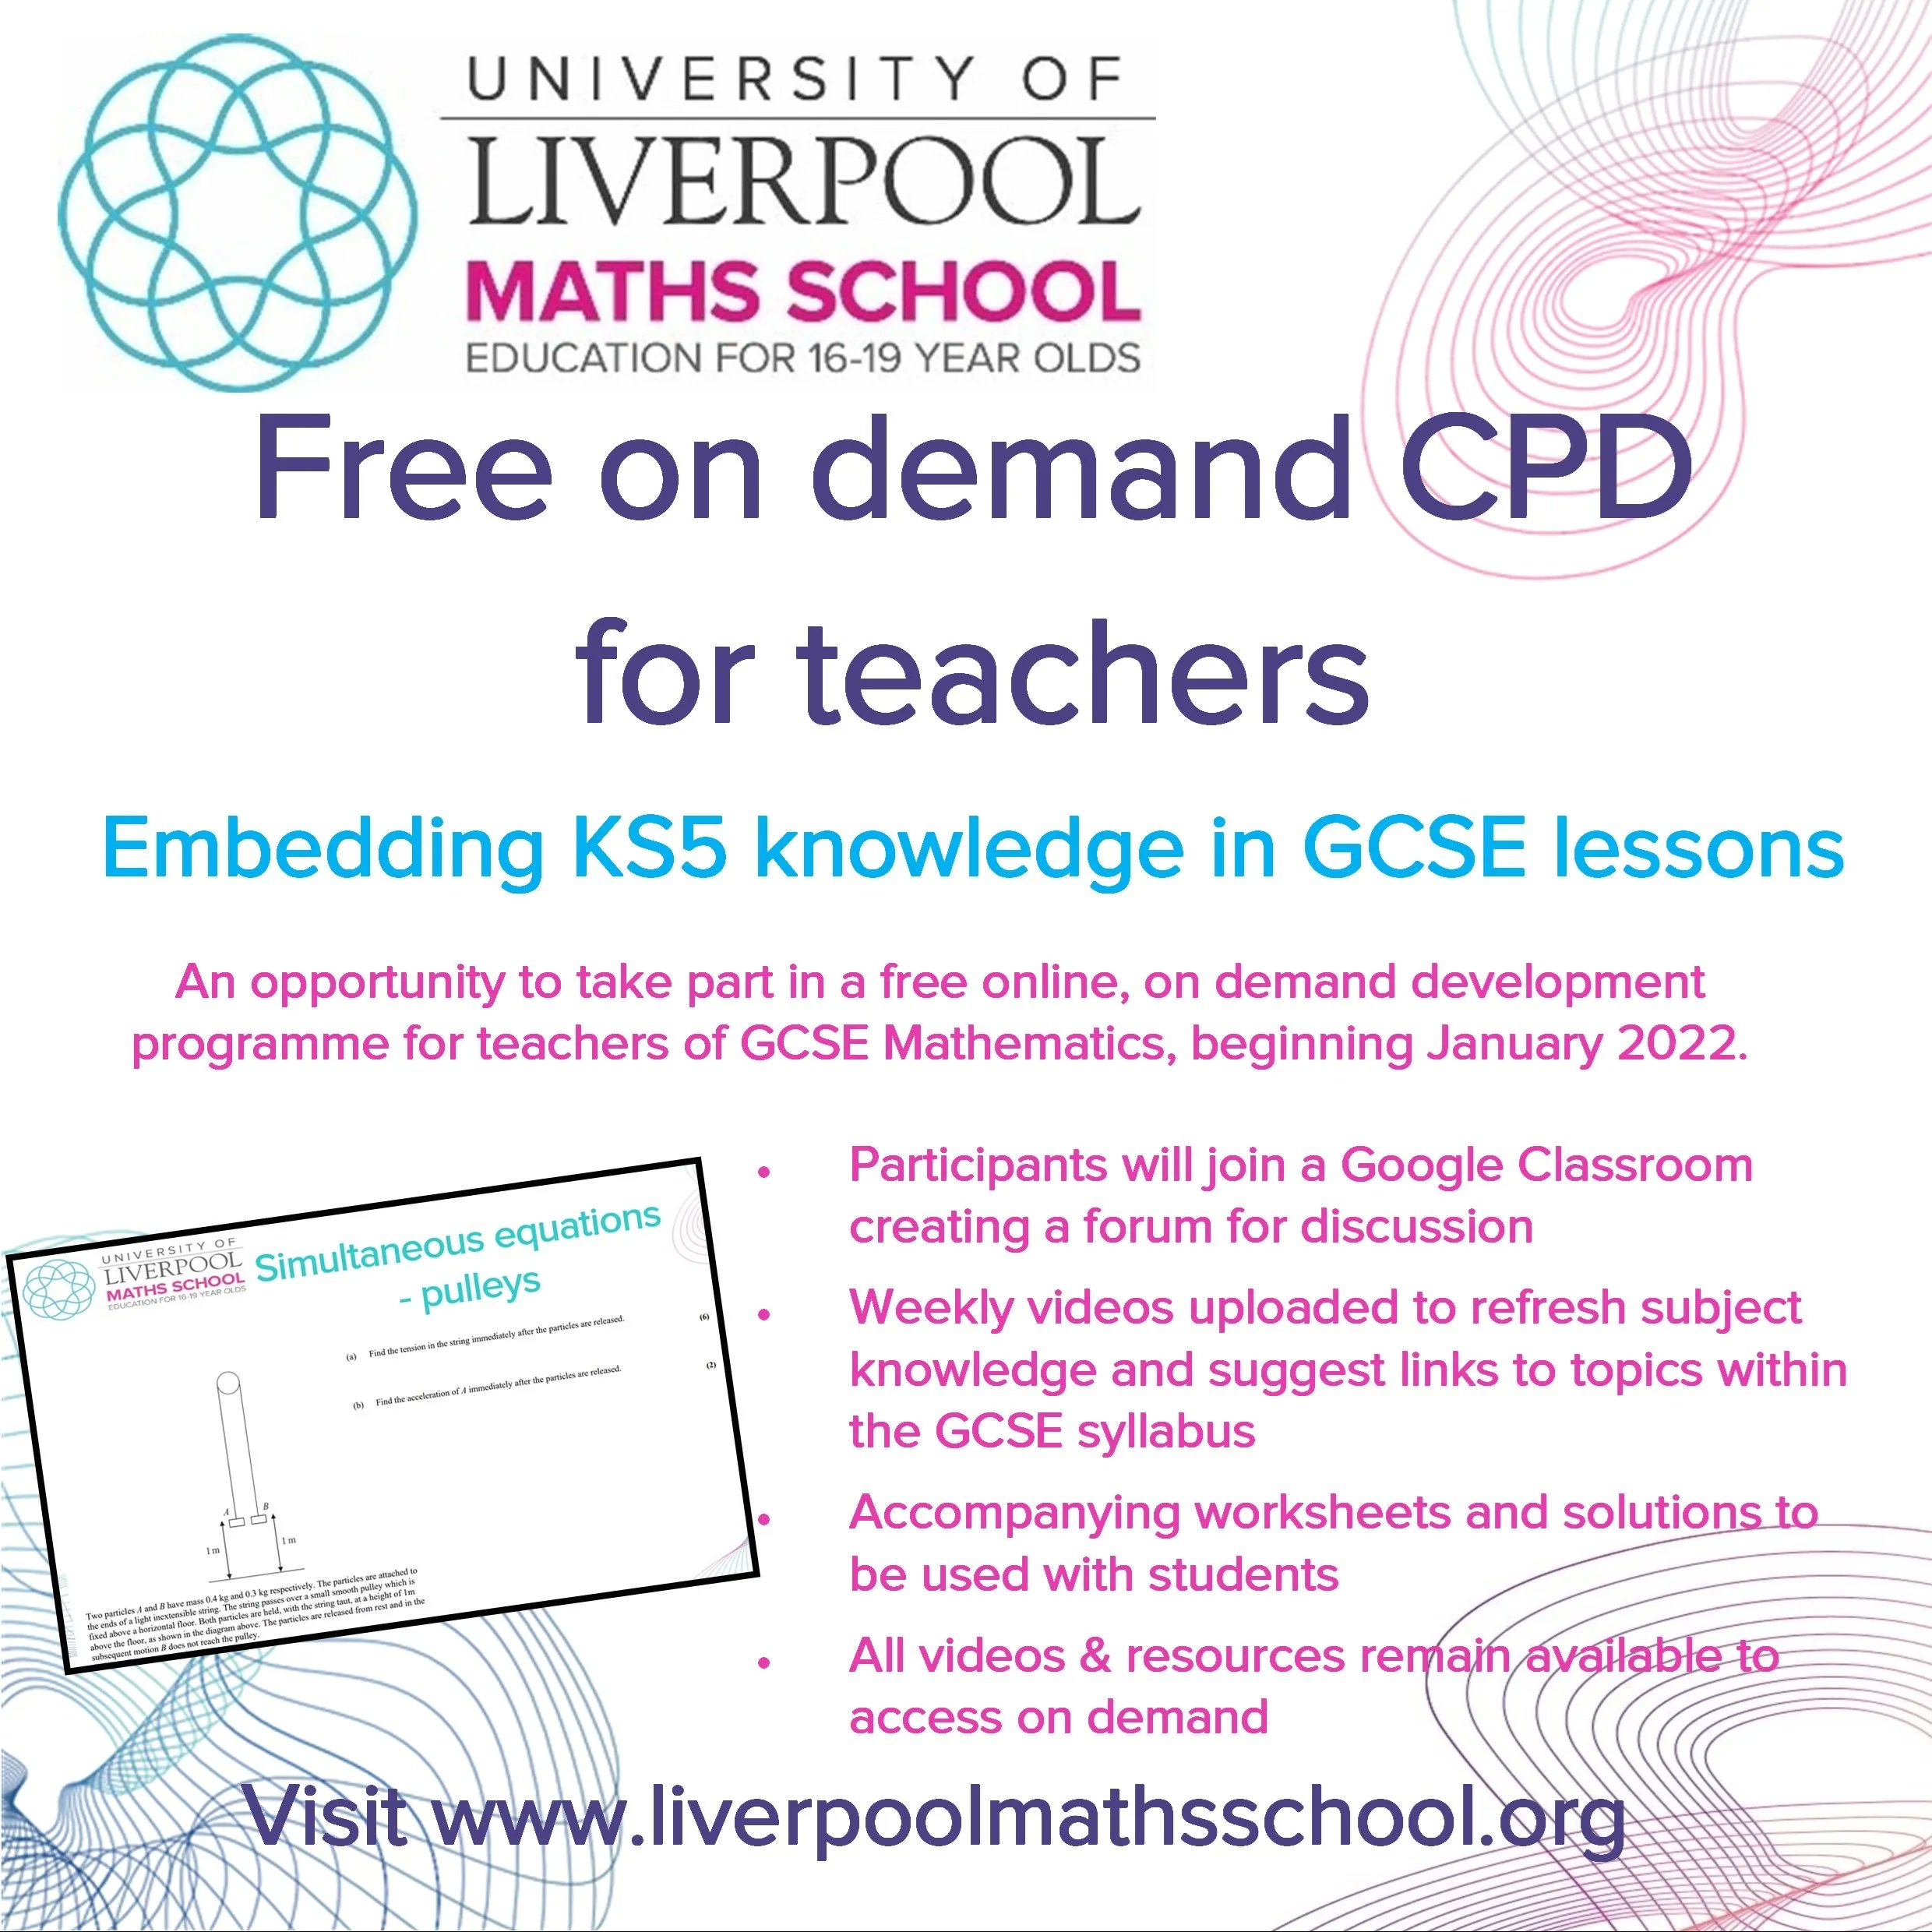 University of 16-19 Maths School on Twitter: "FREE CPD Enriching GCSE lessons with KS5 content With more teachers relating GCSE content to the next level of mathematical study, we can